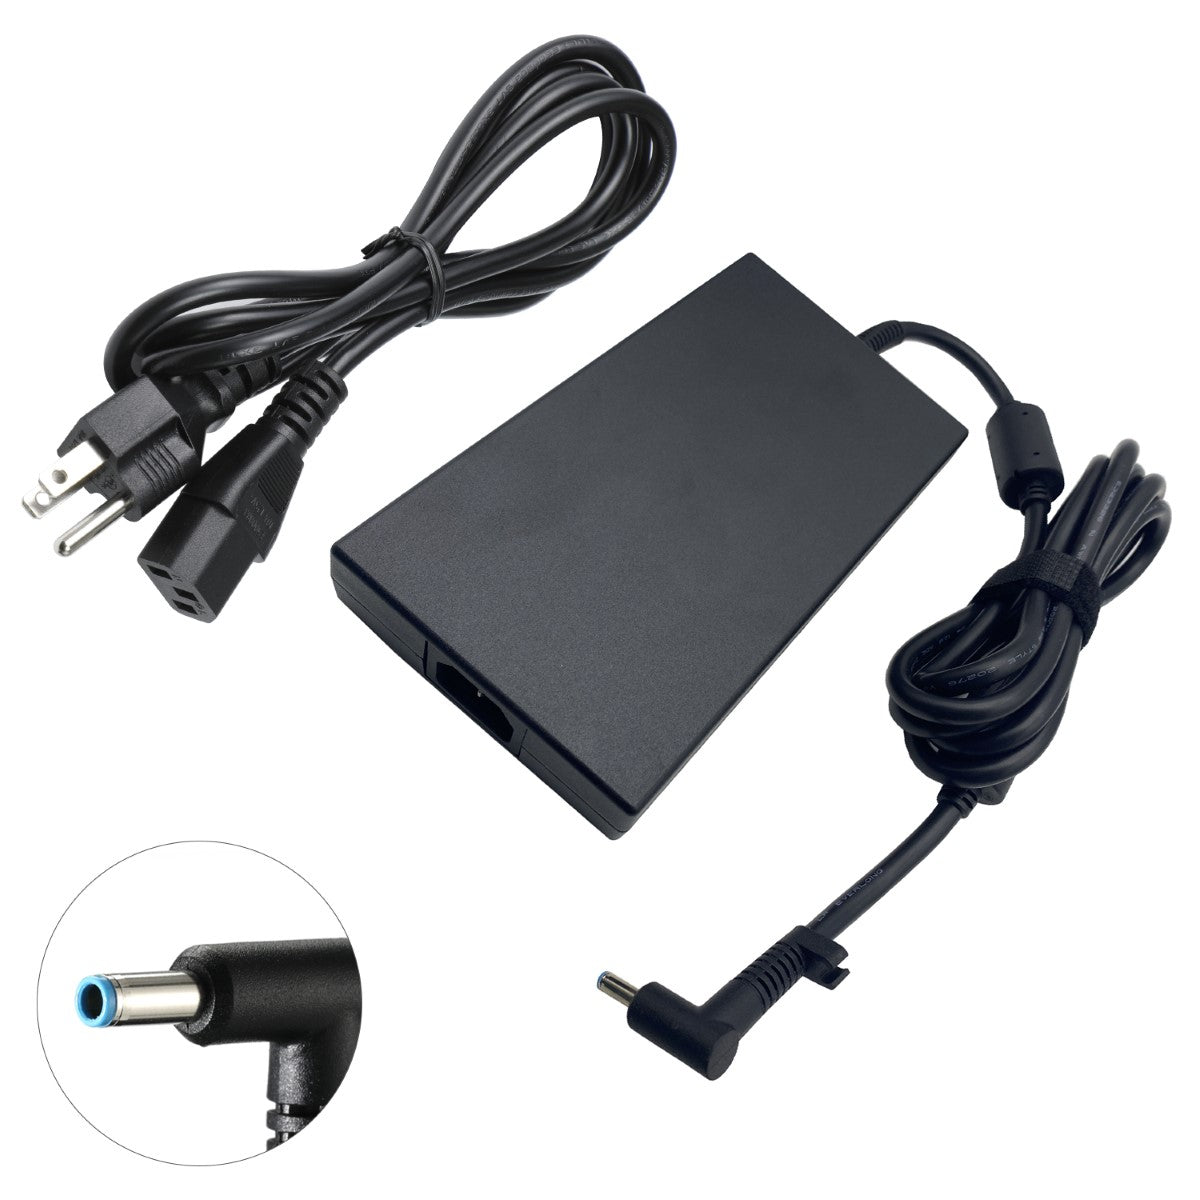 AC Adapter for HP Victus 15-fa0031dx Laptop